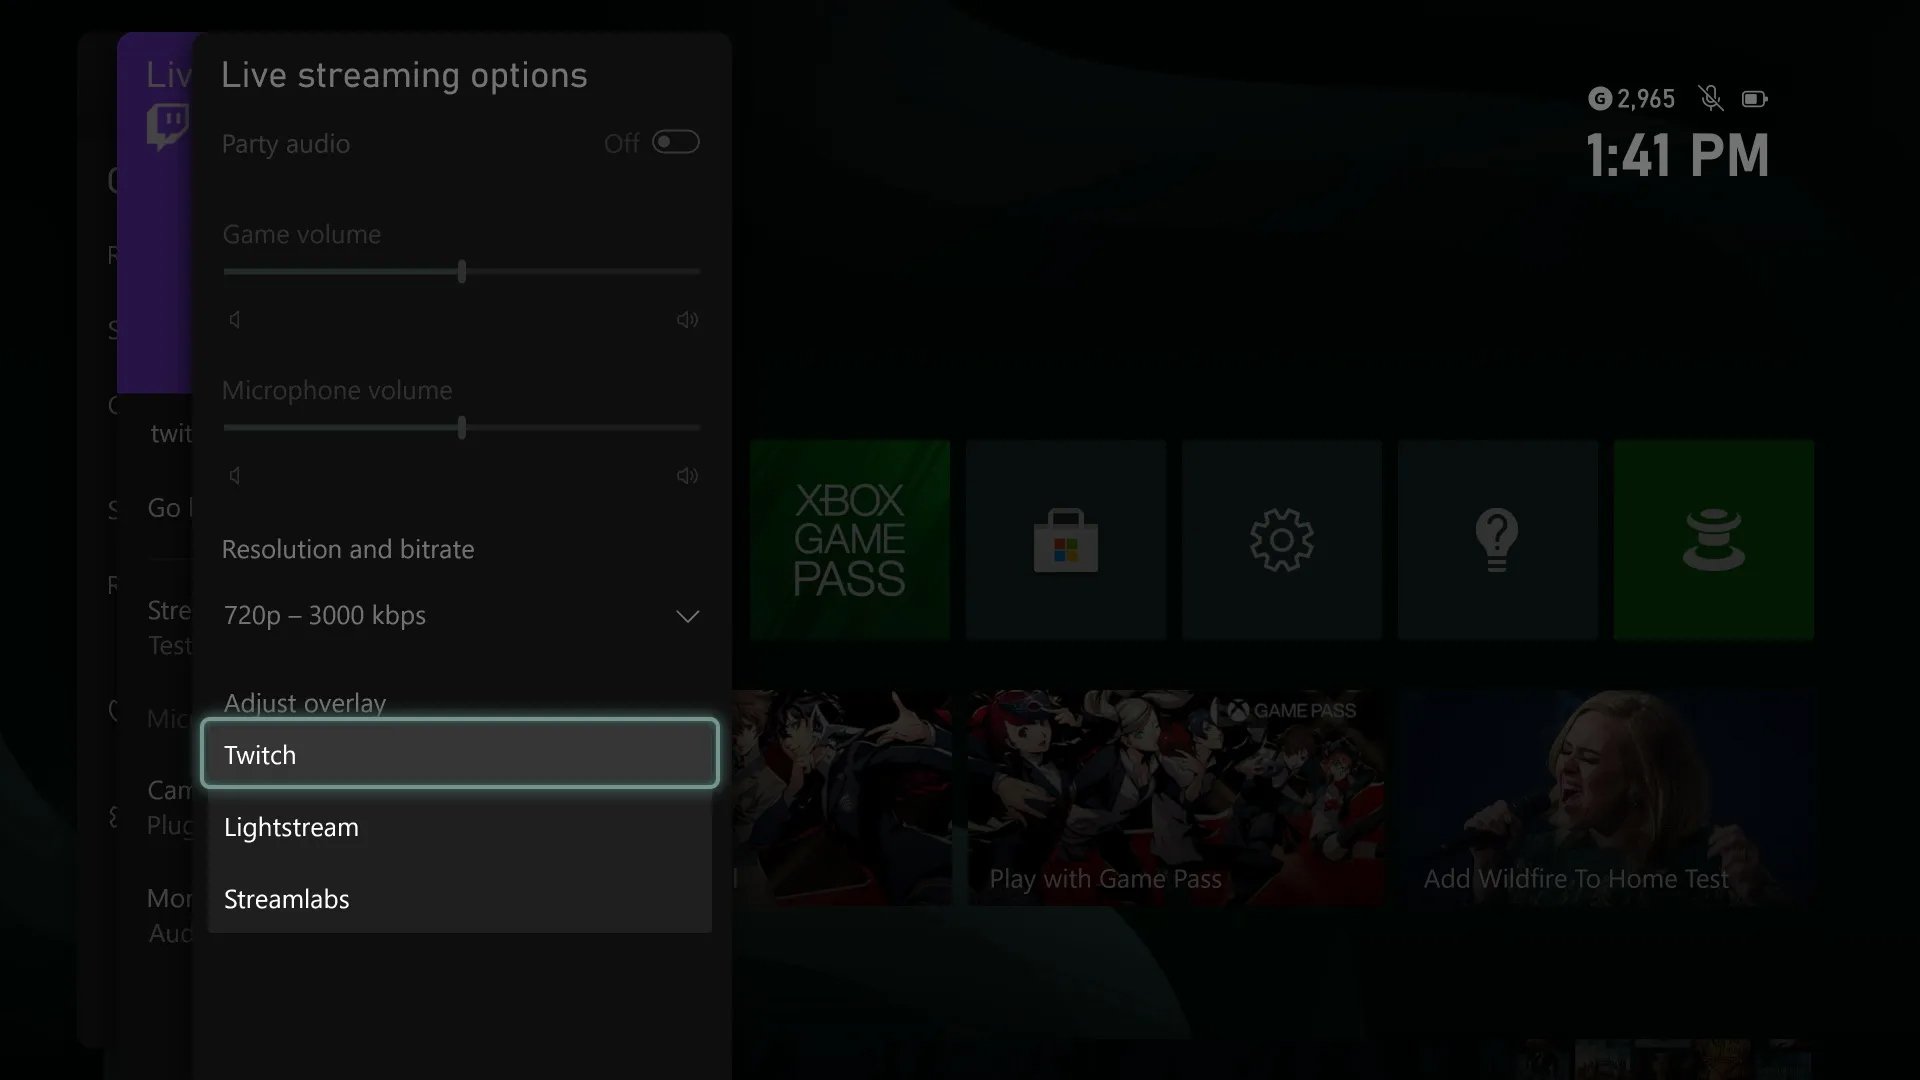 Xbox Cloud Gaming is Coming to Even More Samsung TVs and Adding Rumble  Support - Xbox Wire